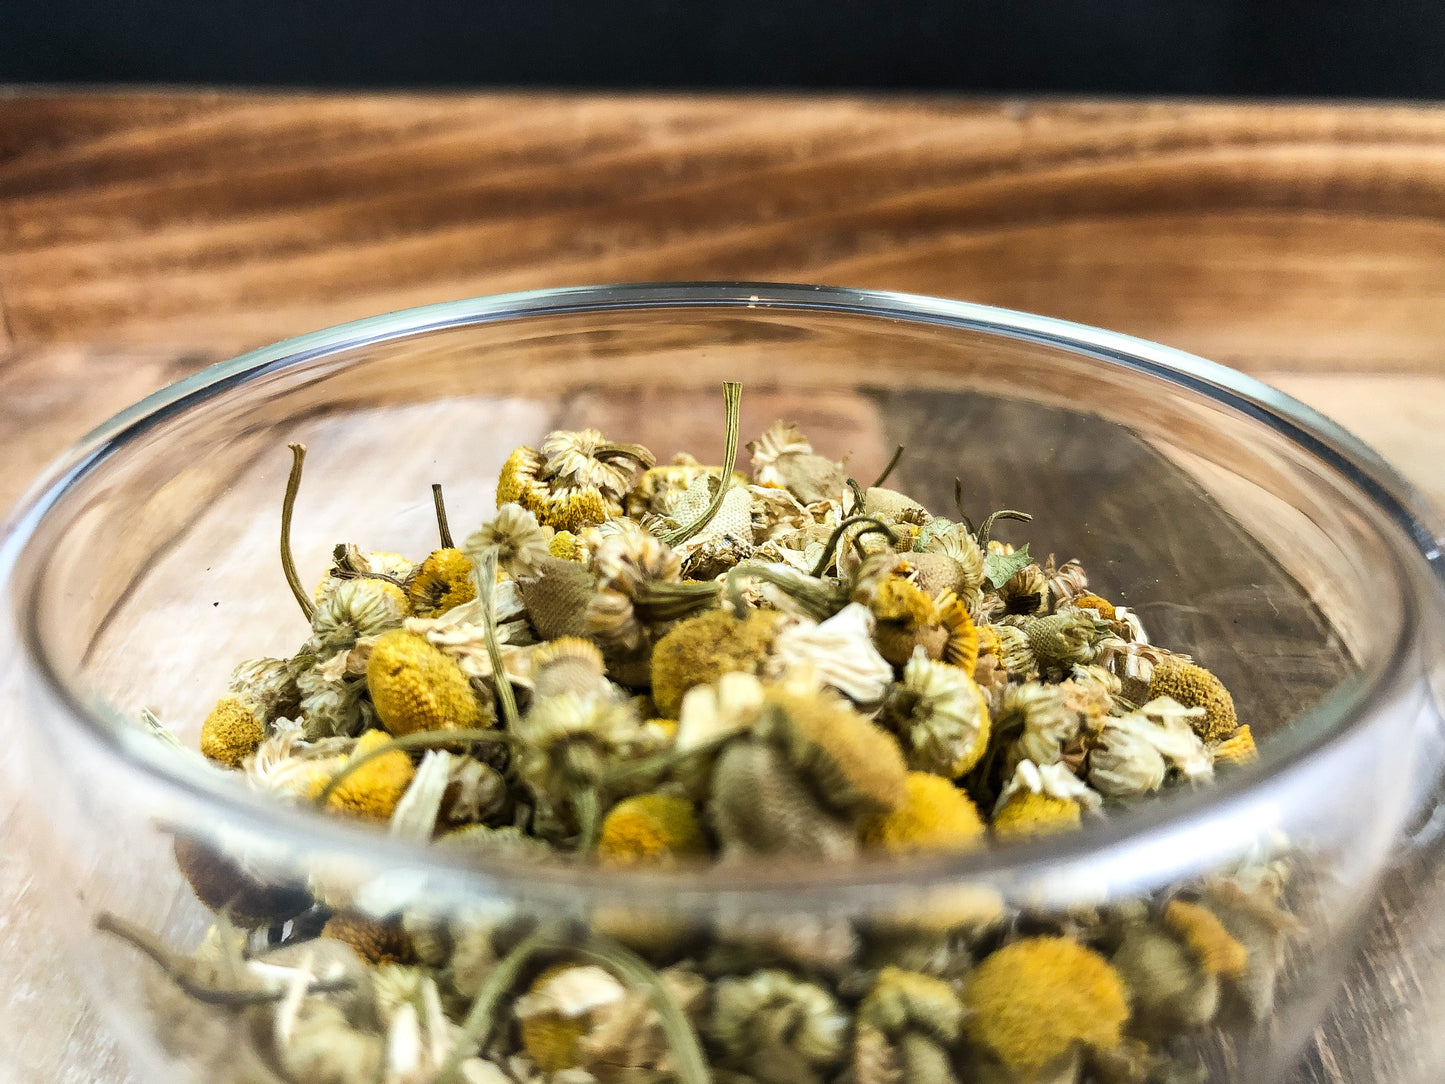 dried chamomile upclose in clear glass cup with wood background